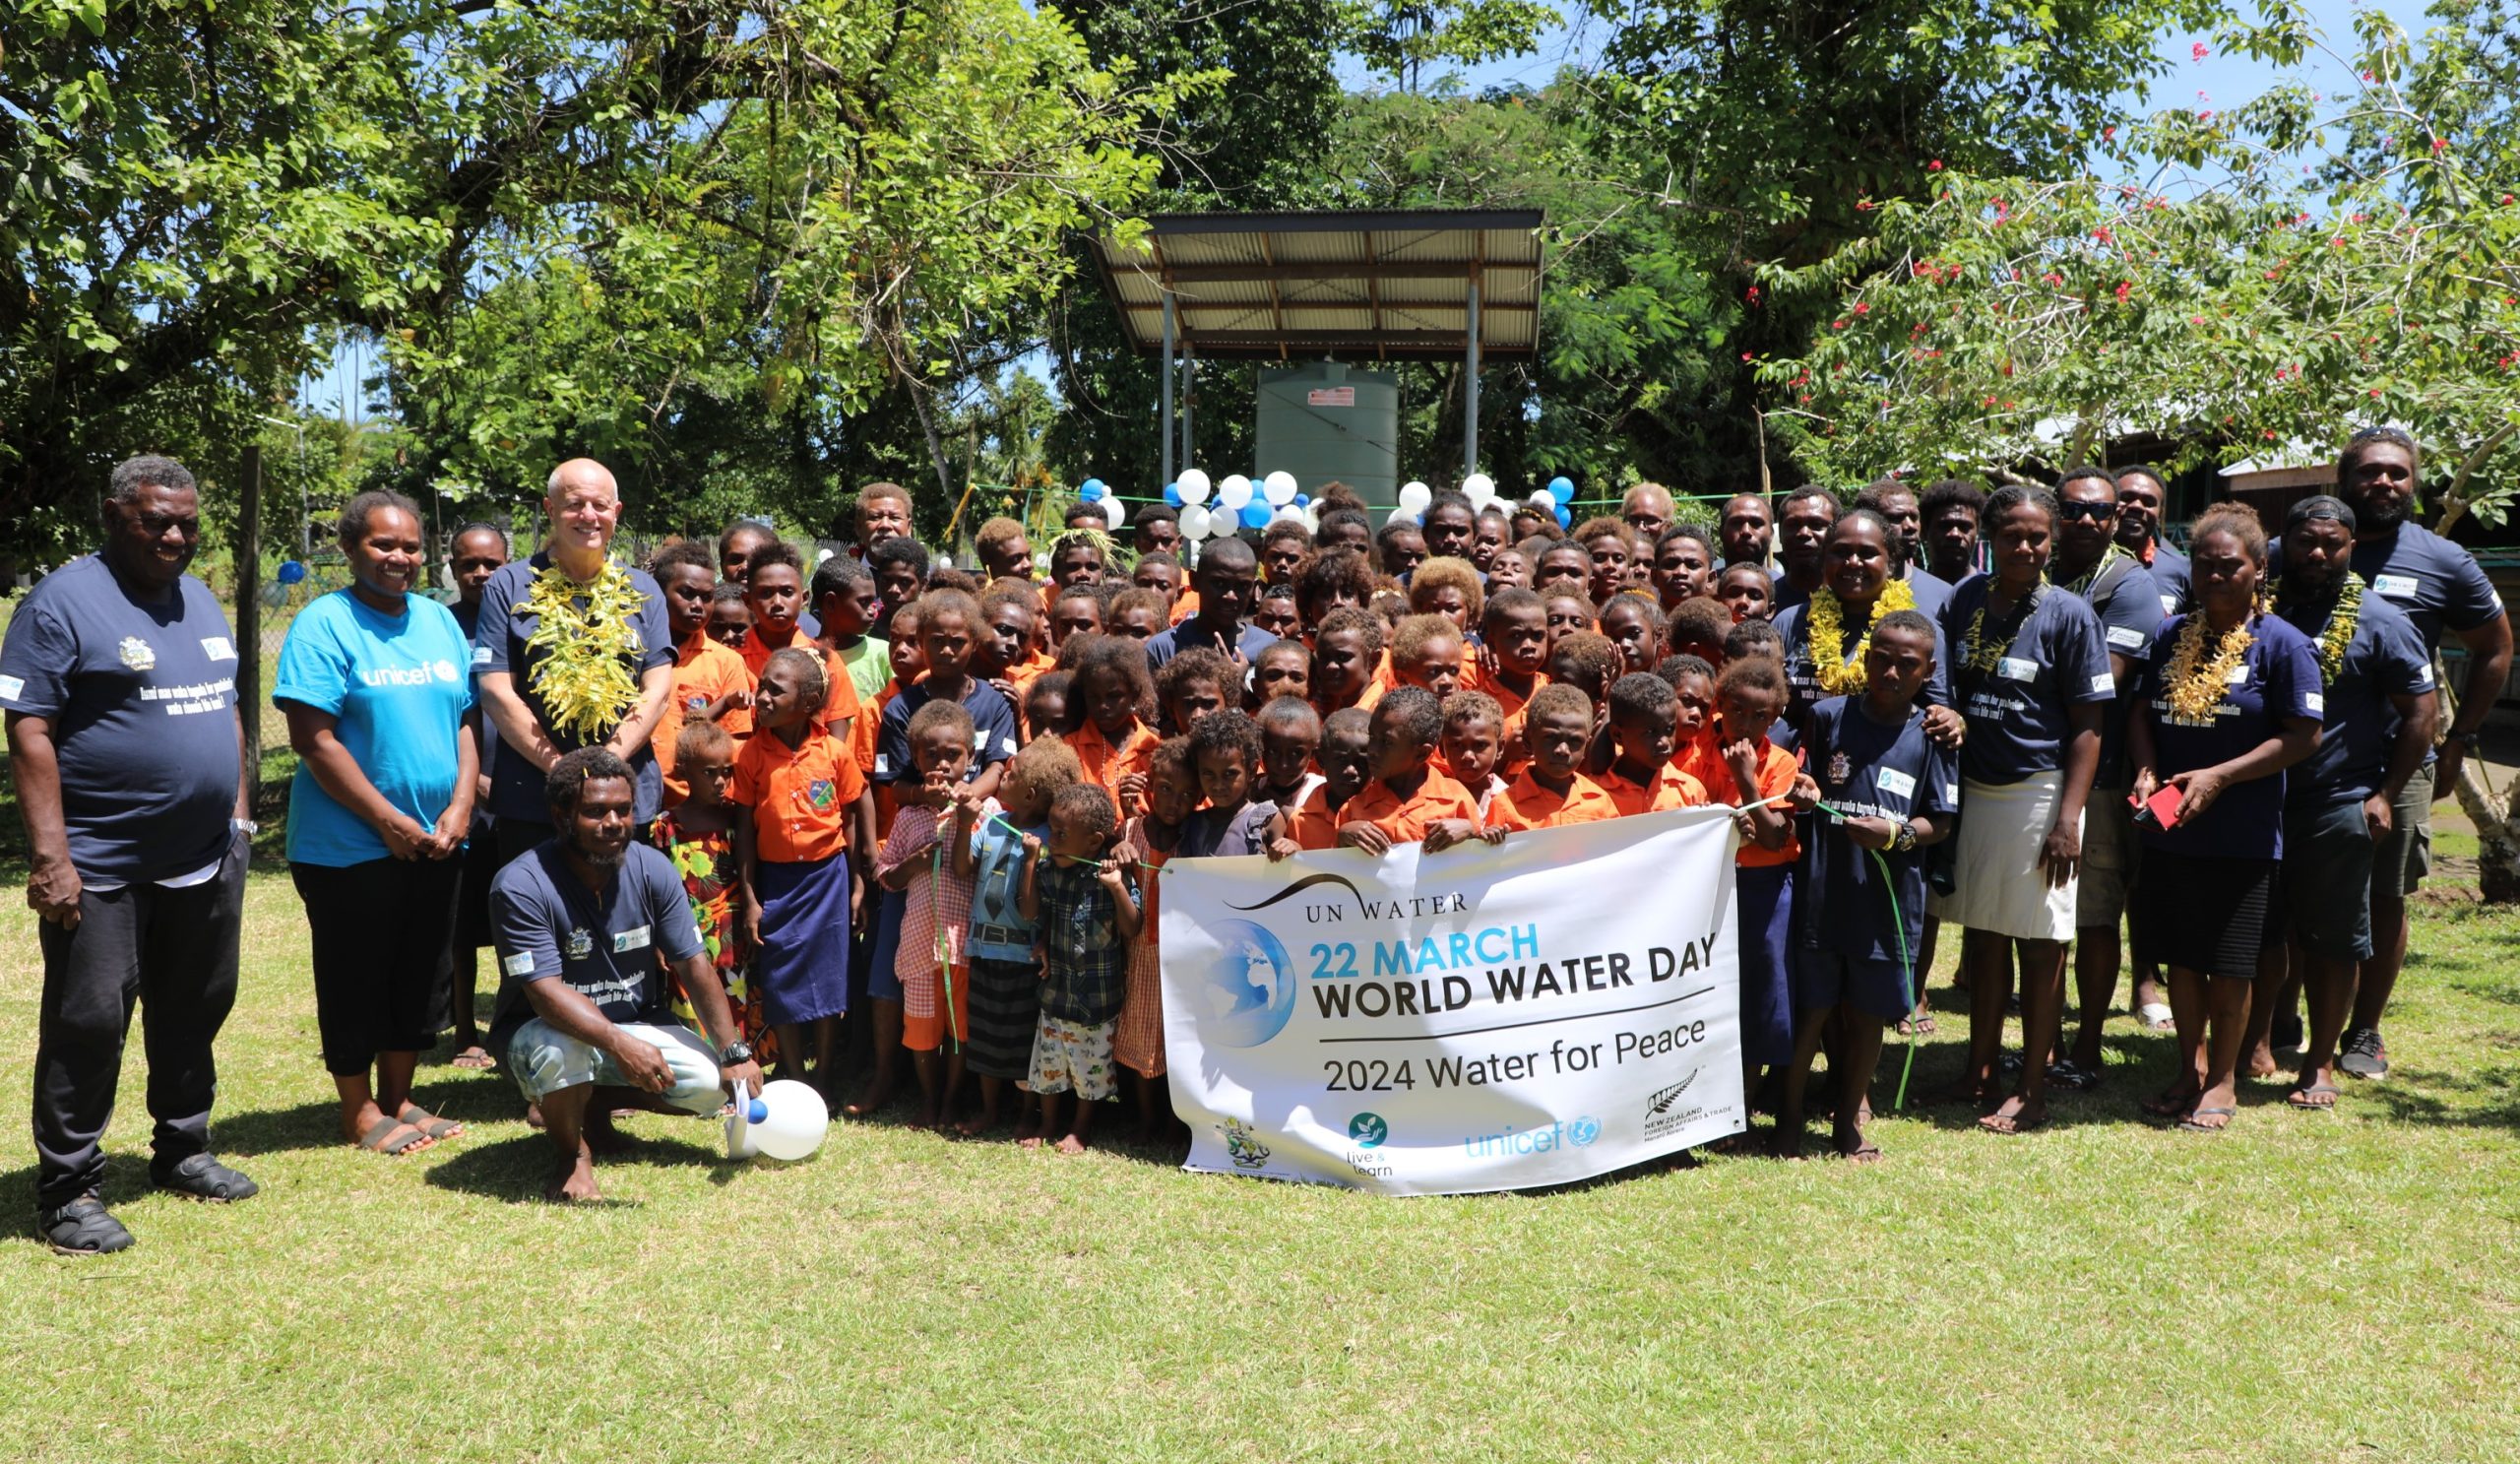 Beaufort Bay Primary School students share success story on accessing fresh water during World Water Day